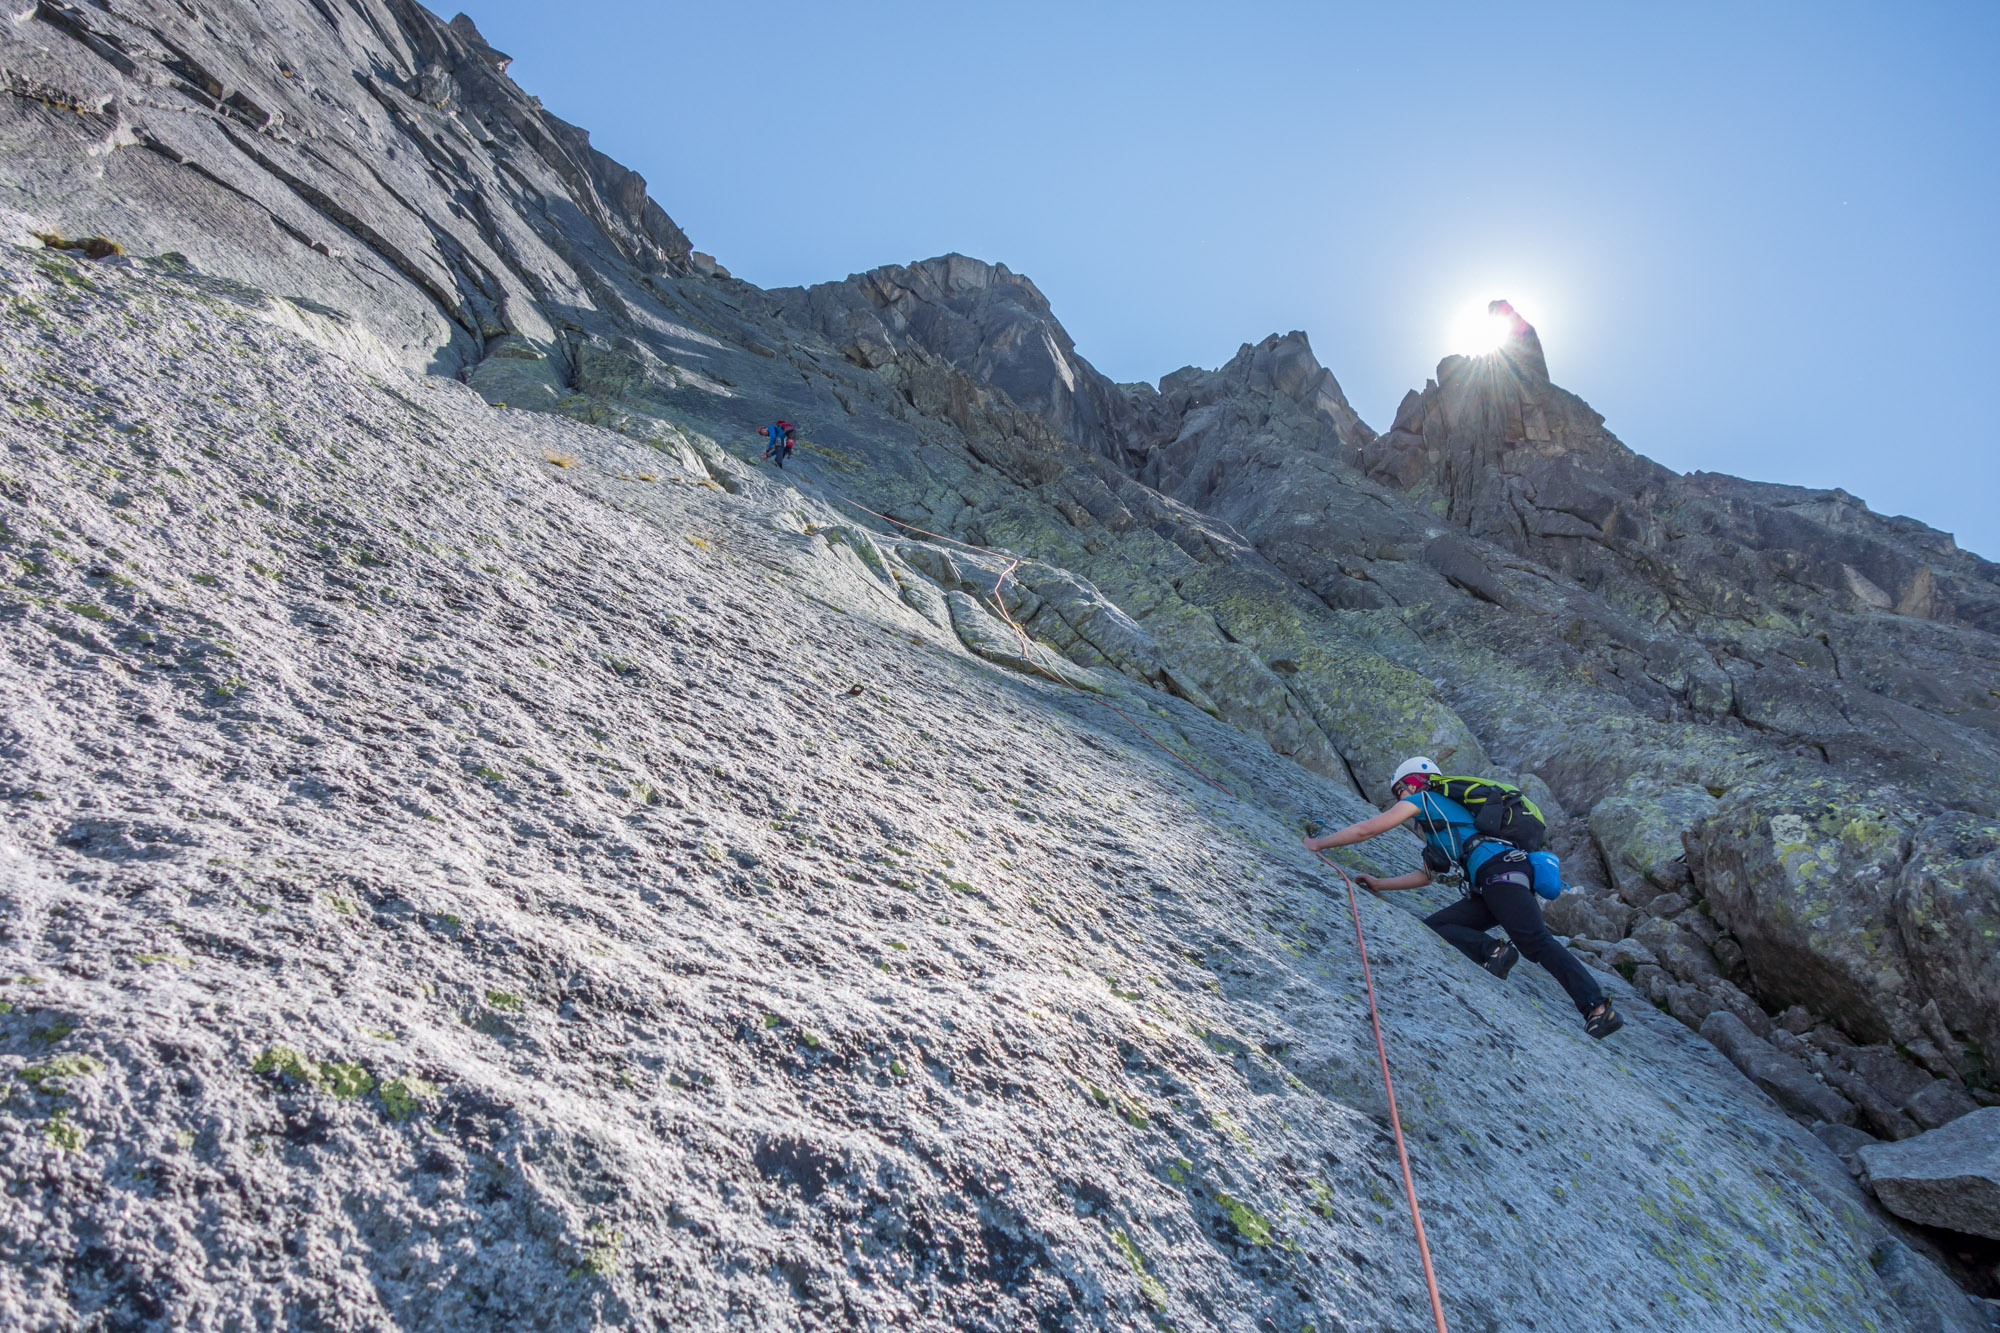 On the first pitch of the brilliant Lepidopteres with the crest of the Papillons Ridge above. Photo credit: Mark Reid